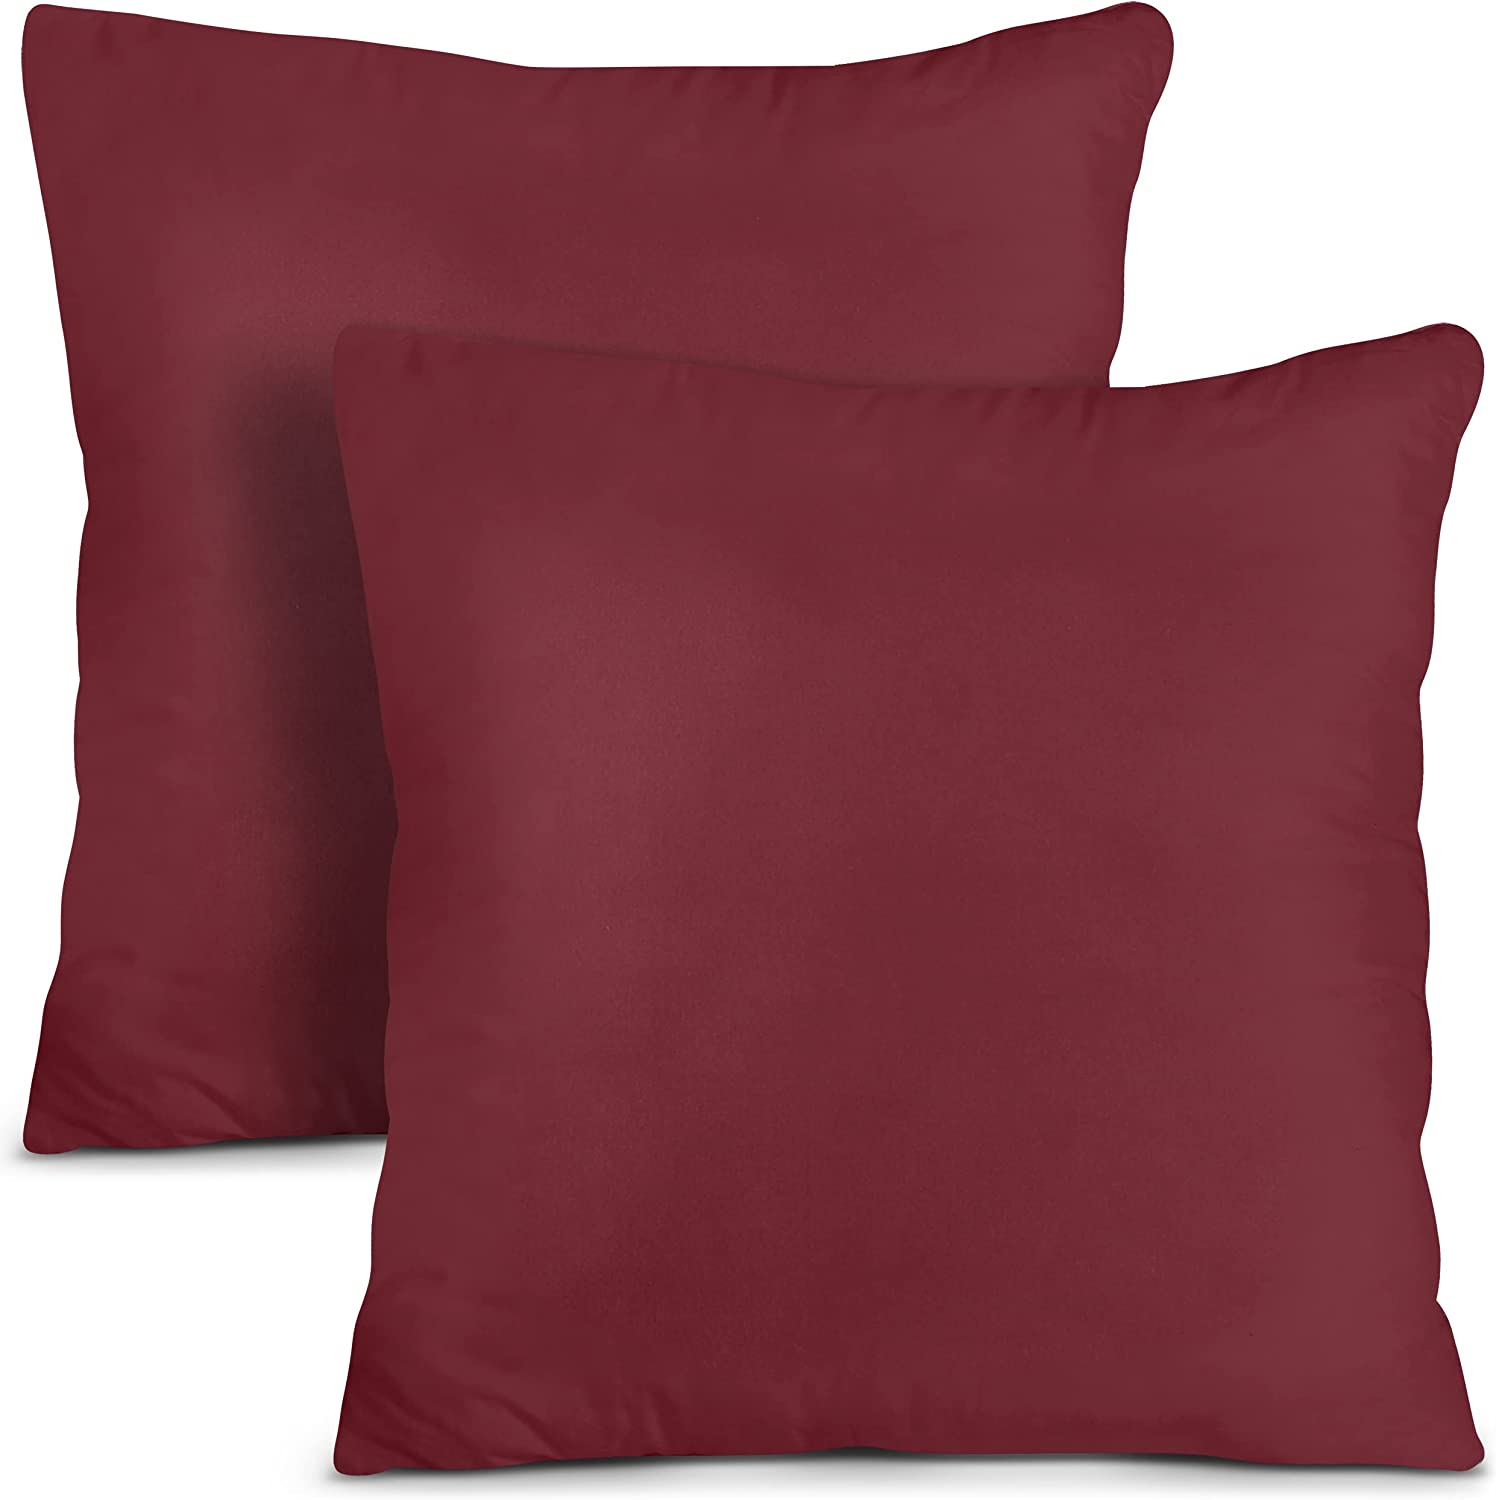 Utopia Bedding Throw Pillows Insert Pack of 2 White - 12 x 20 Inches.